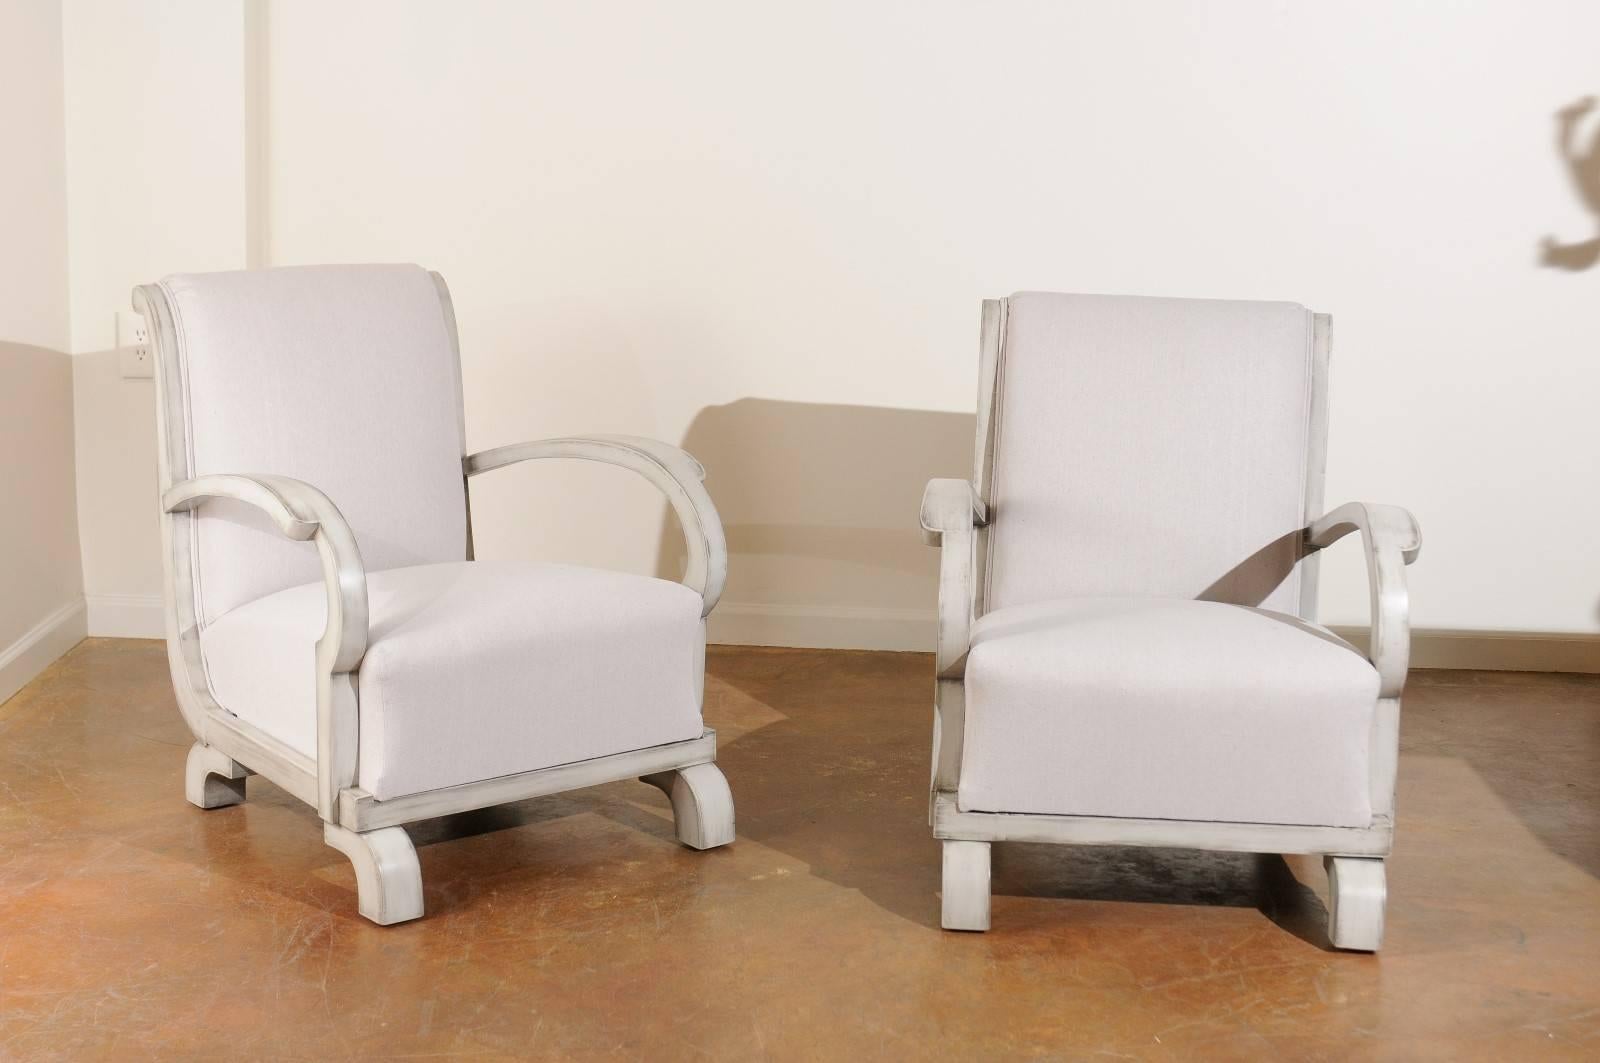 This pair of Art Deco period painted club chairs from the early 20th century features nicely out-scrolled backs and simply curved arms. The chairs are upholstered in a cream fabric. The chairs are raised on four bracket feet turned sideways and